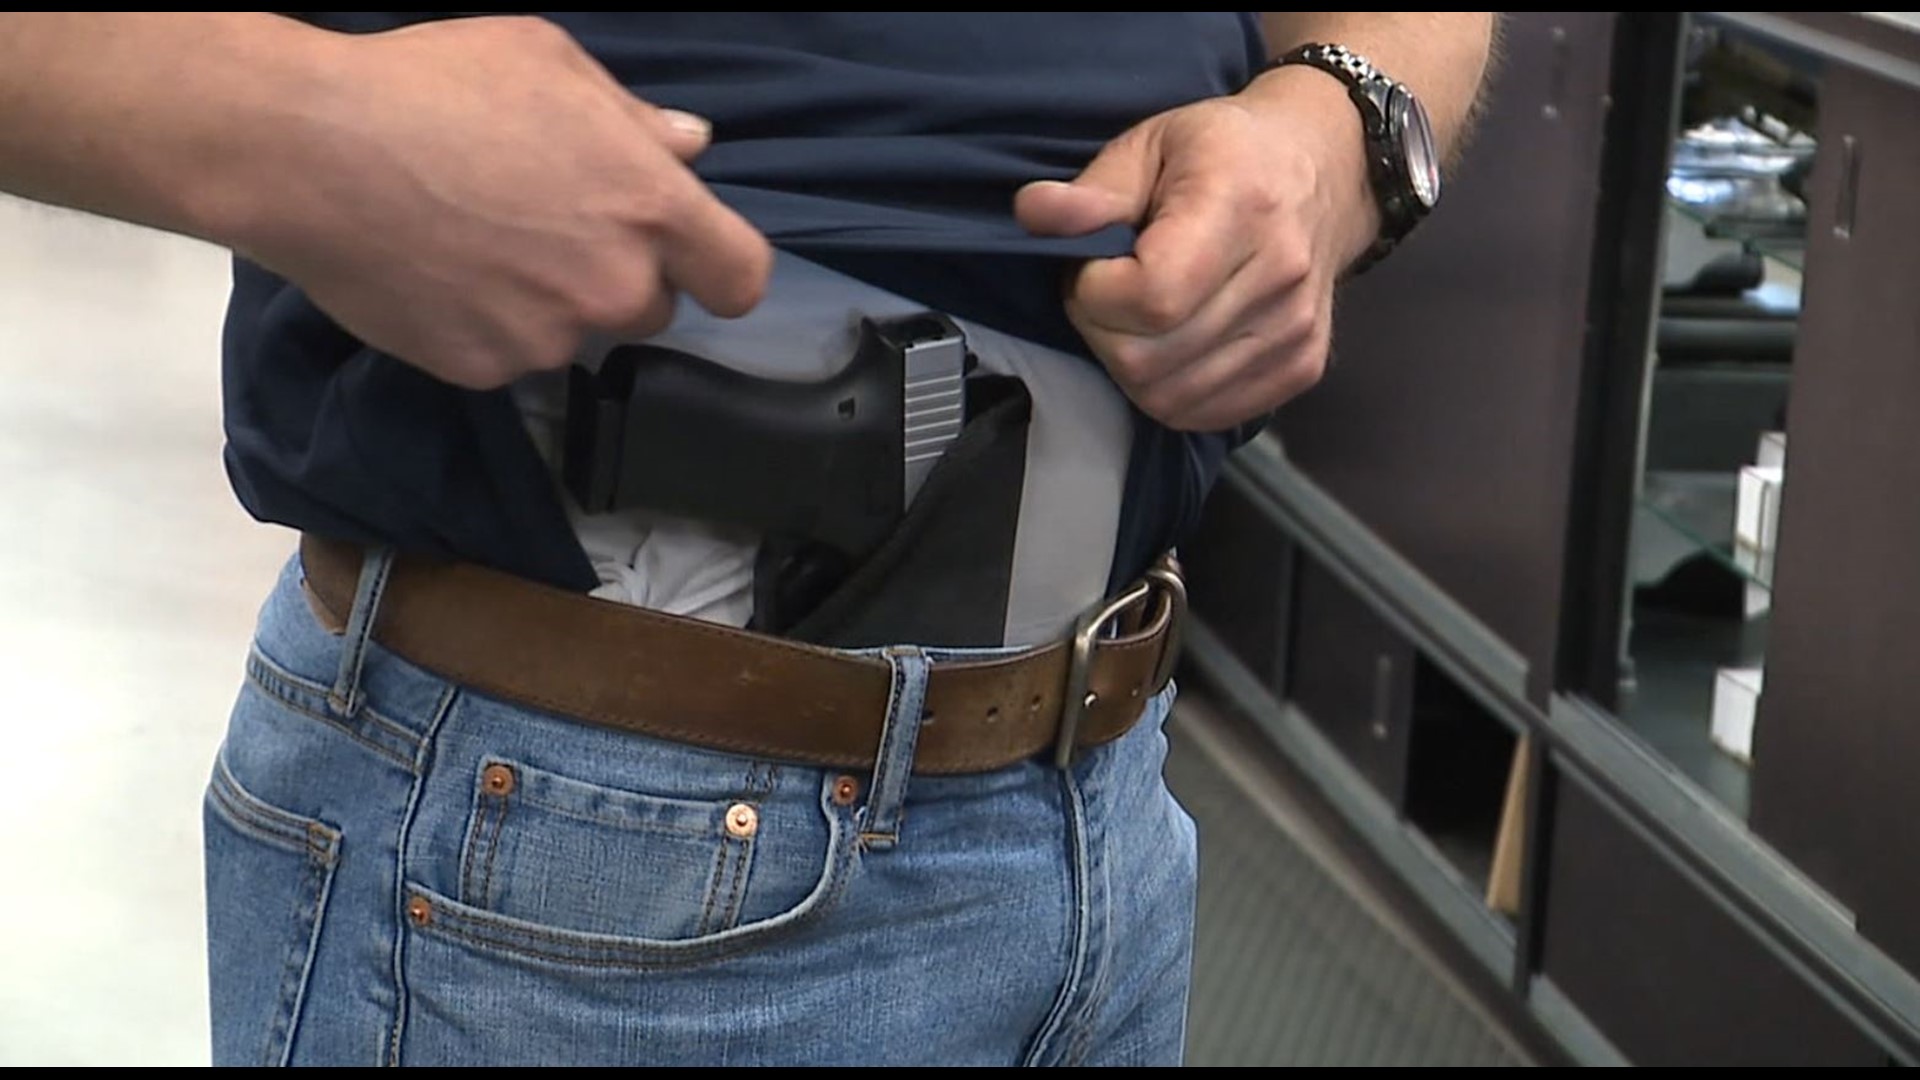 Ohio will join 22 other states in allowing people to carry concealed firearms without a license